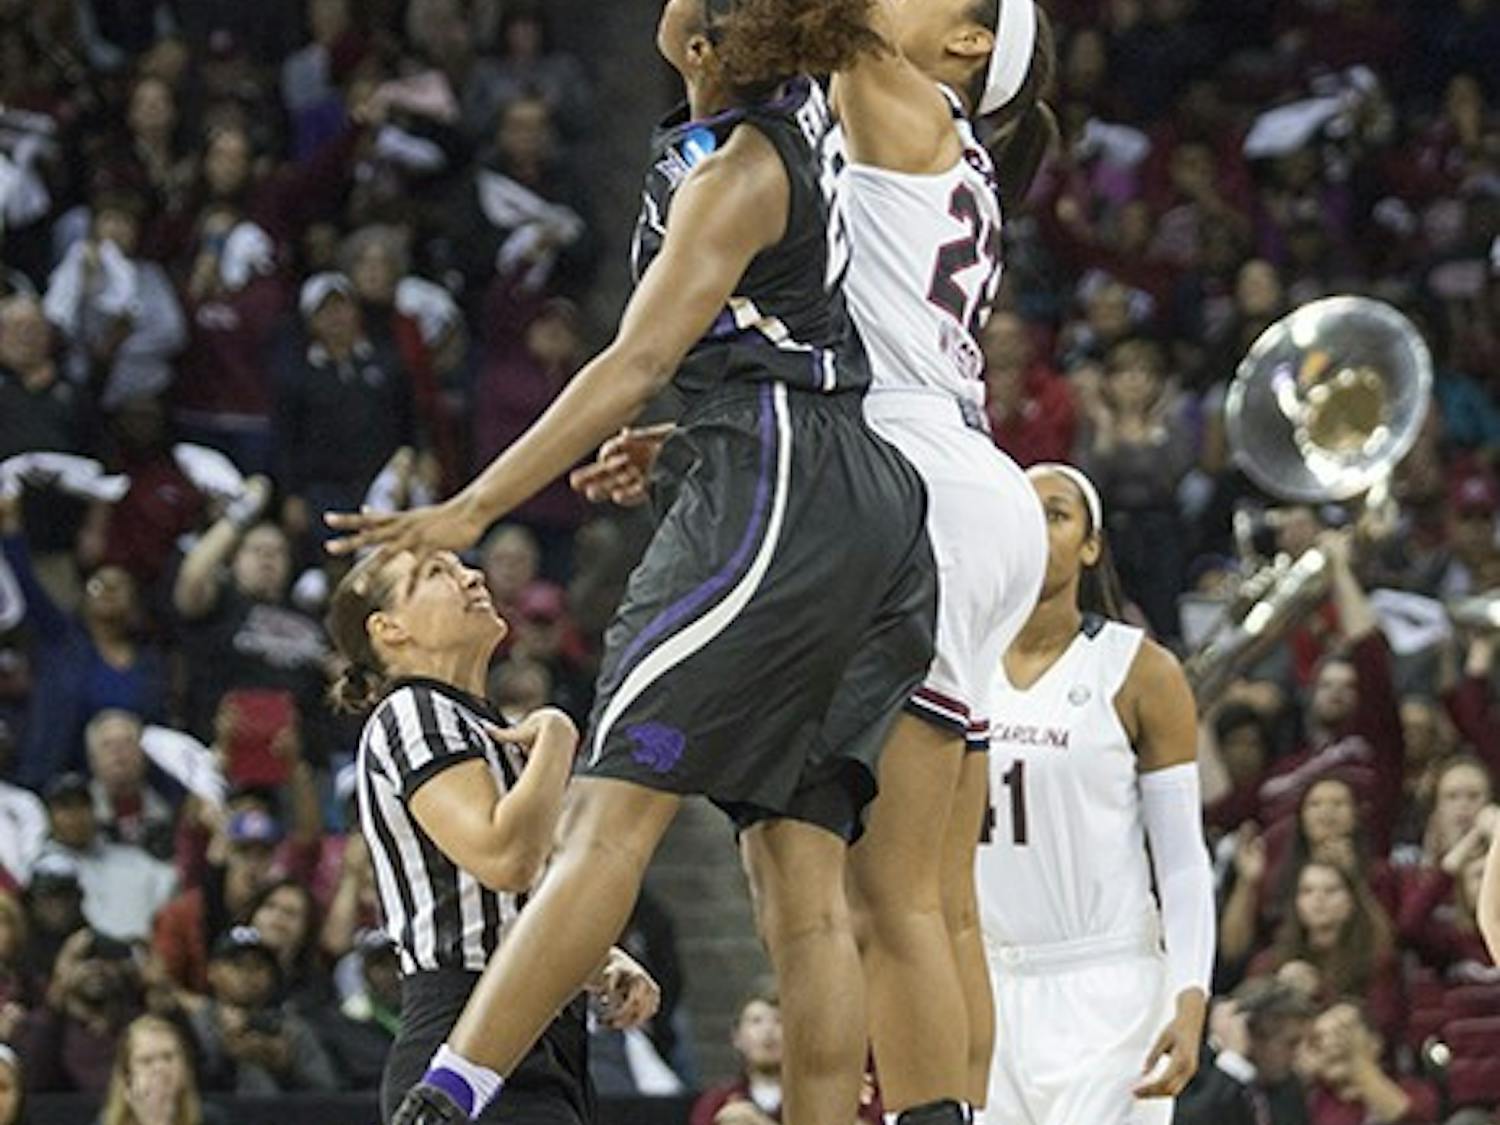 Women's basketball won against Kansas State Wildcats on Sunday, March 20, 2016. Final score: Gamecocks 73, Wildcats 47. The win sends the Gamecocks to the Sweet 16 which will be hosted in Sioux Falls, South Dakota. 